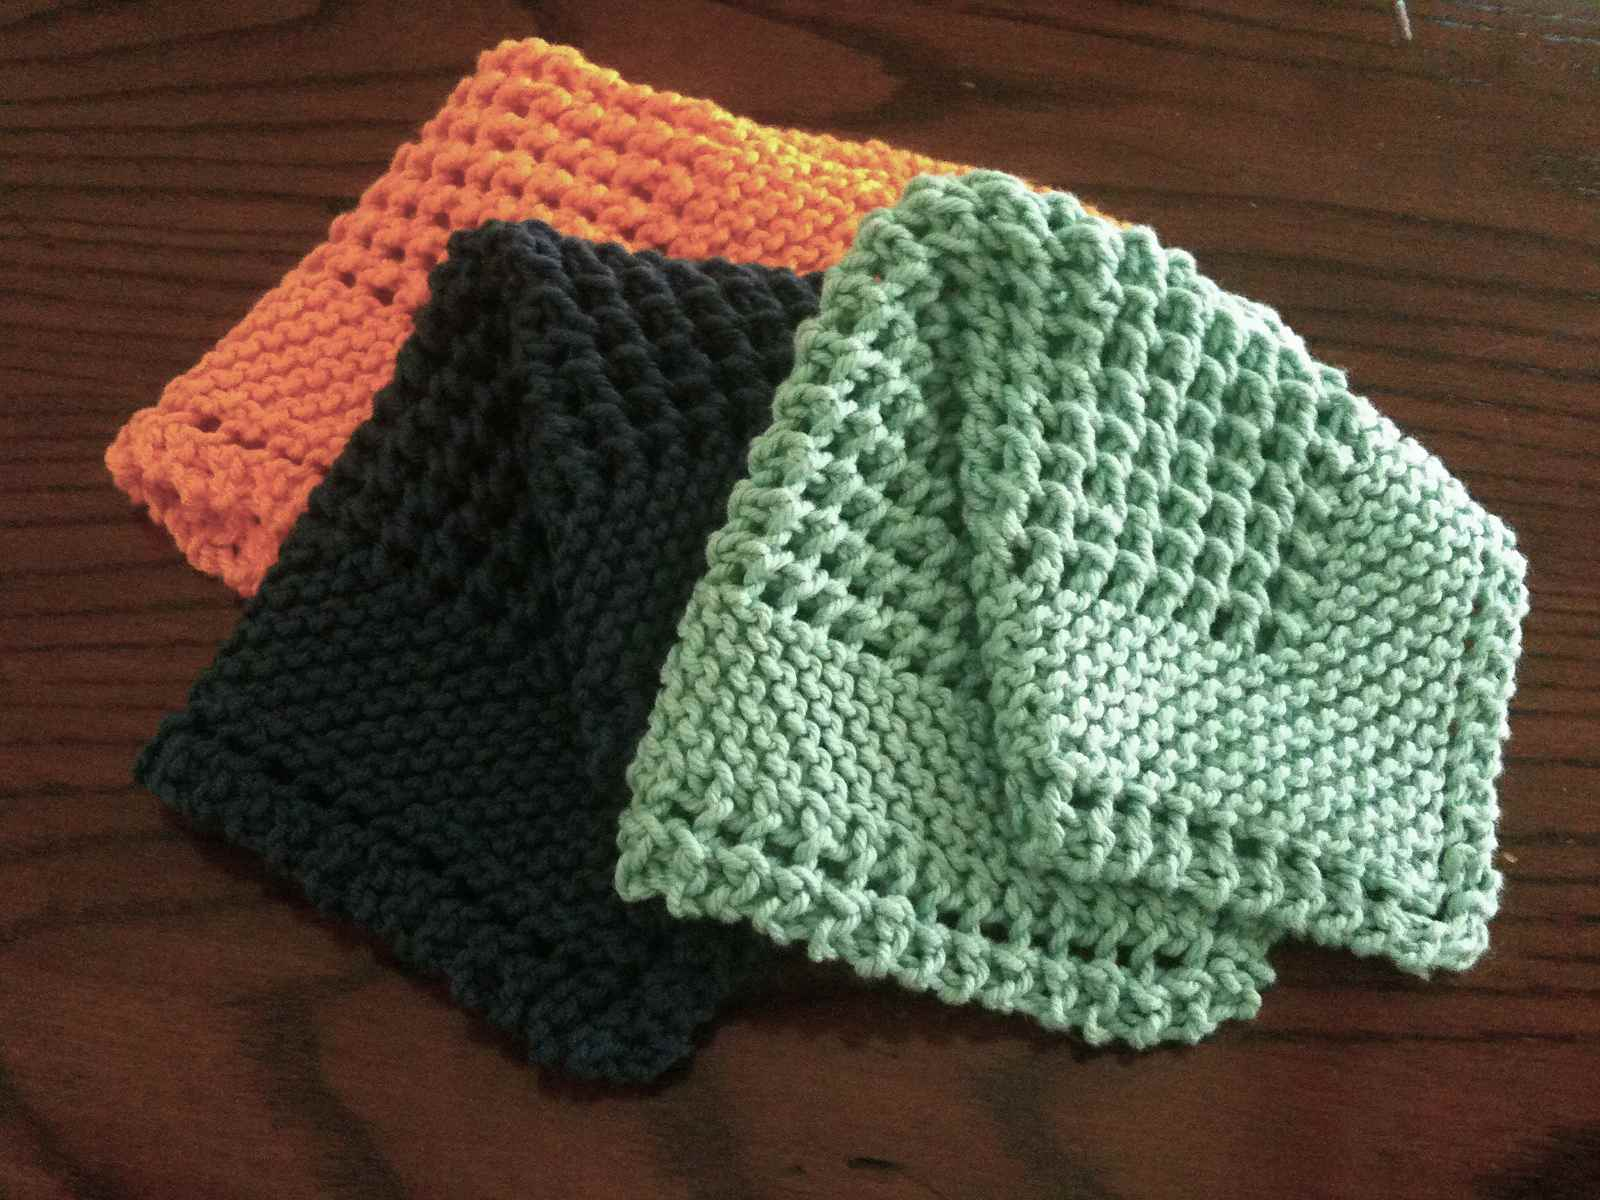 Free Knitted Dishcloth Pattern 10 Knit Dishcloth Patterns For Beginners